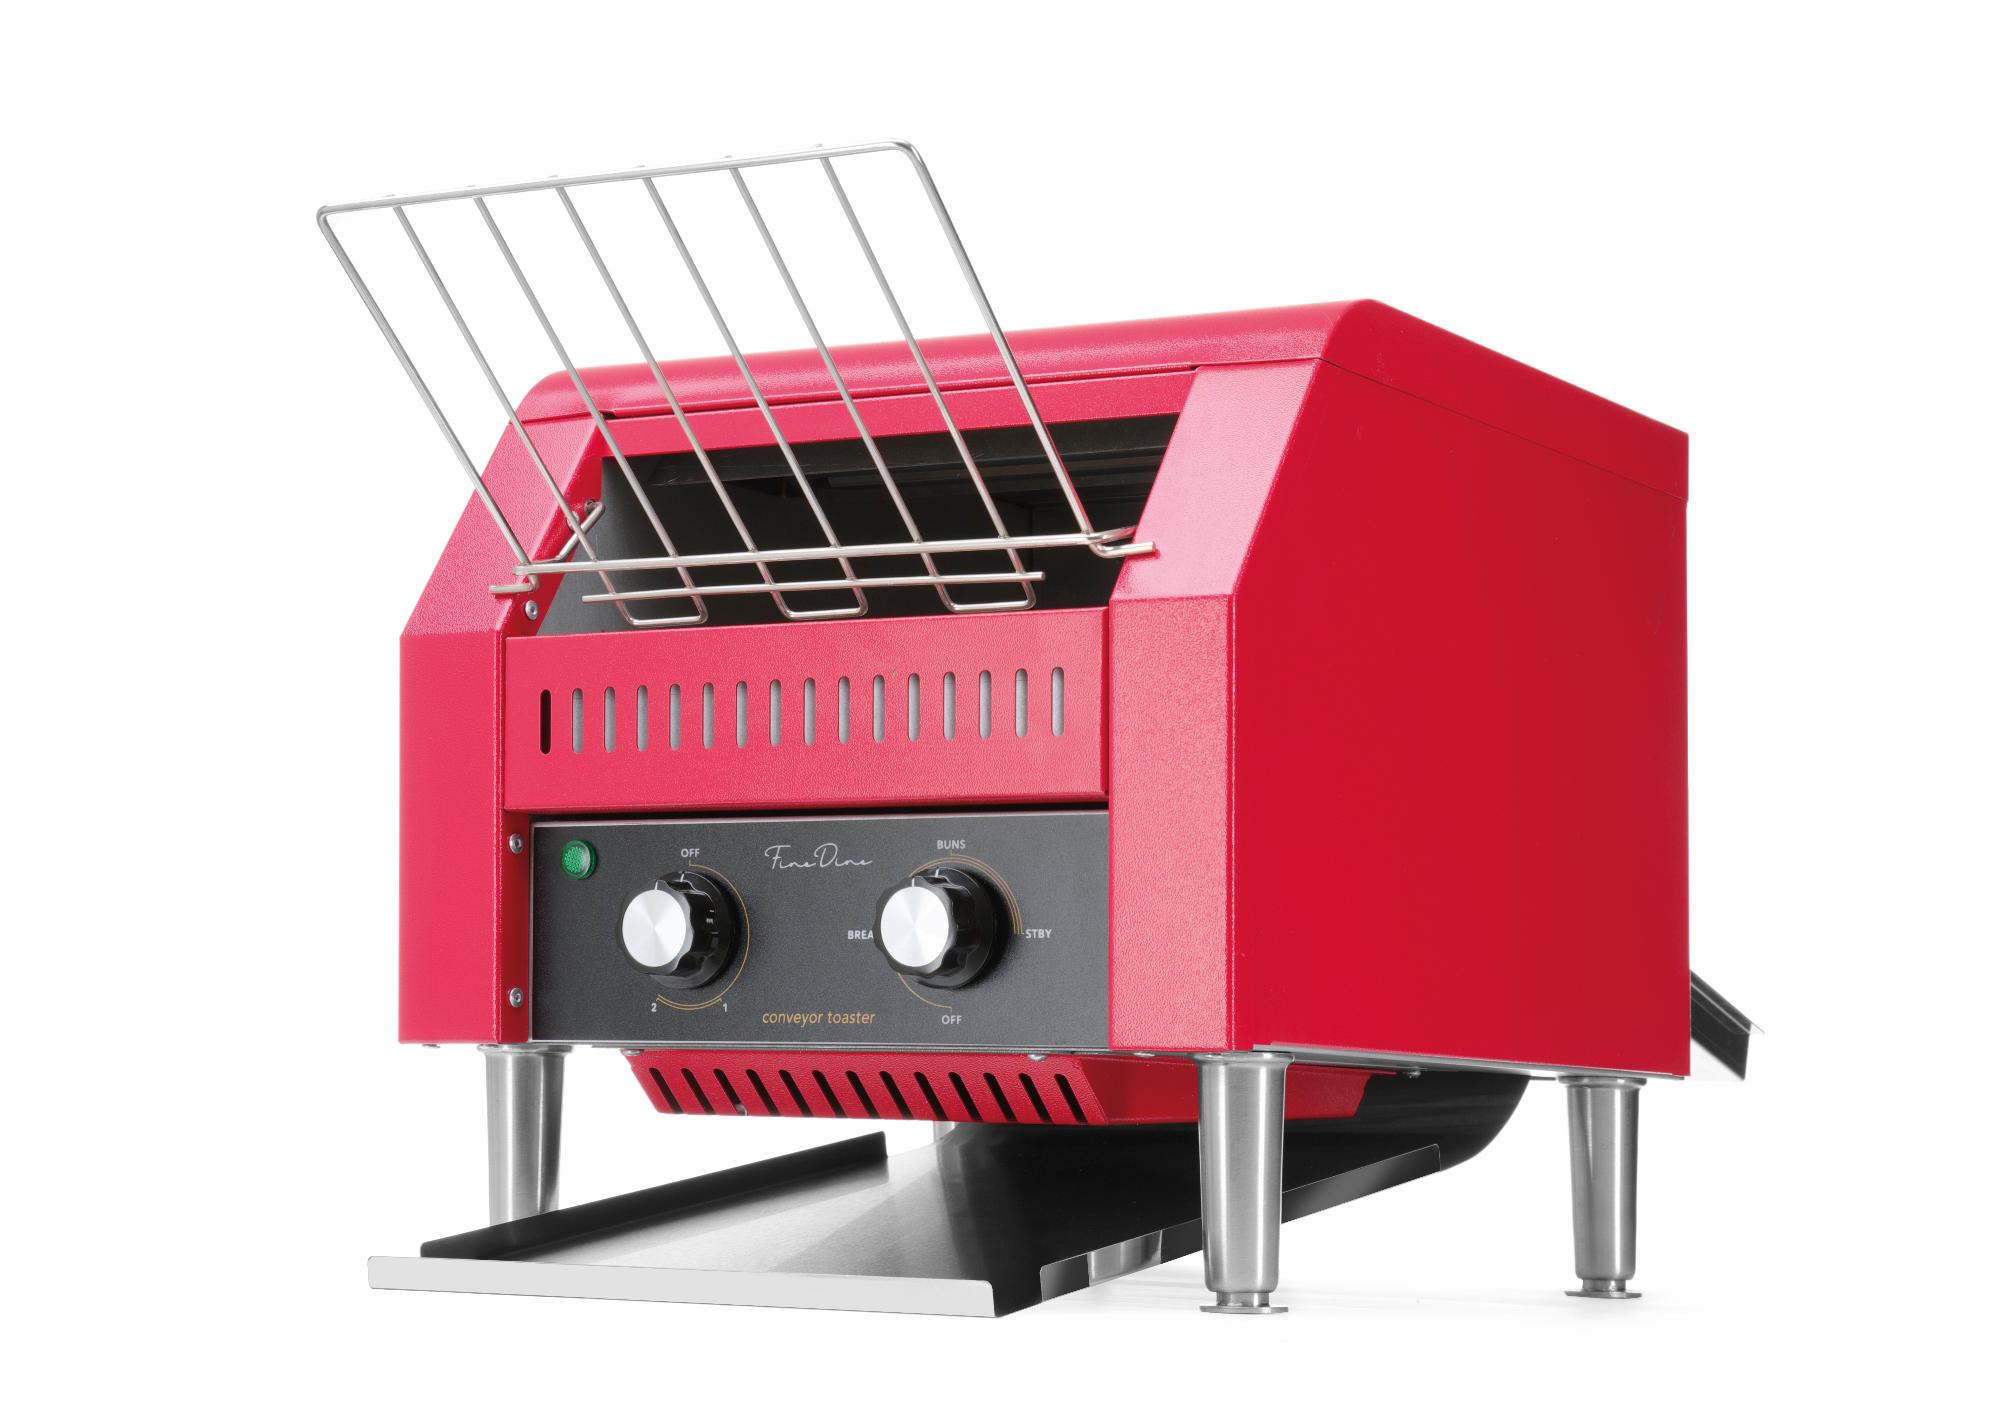 Conveyor toaster Red, 418x368mm